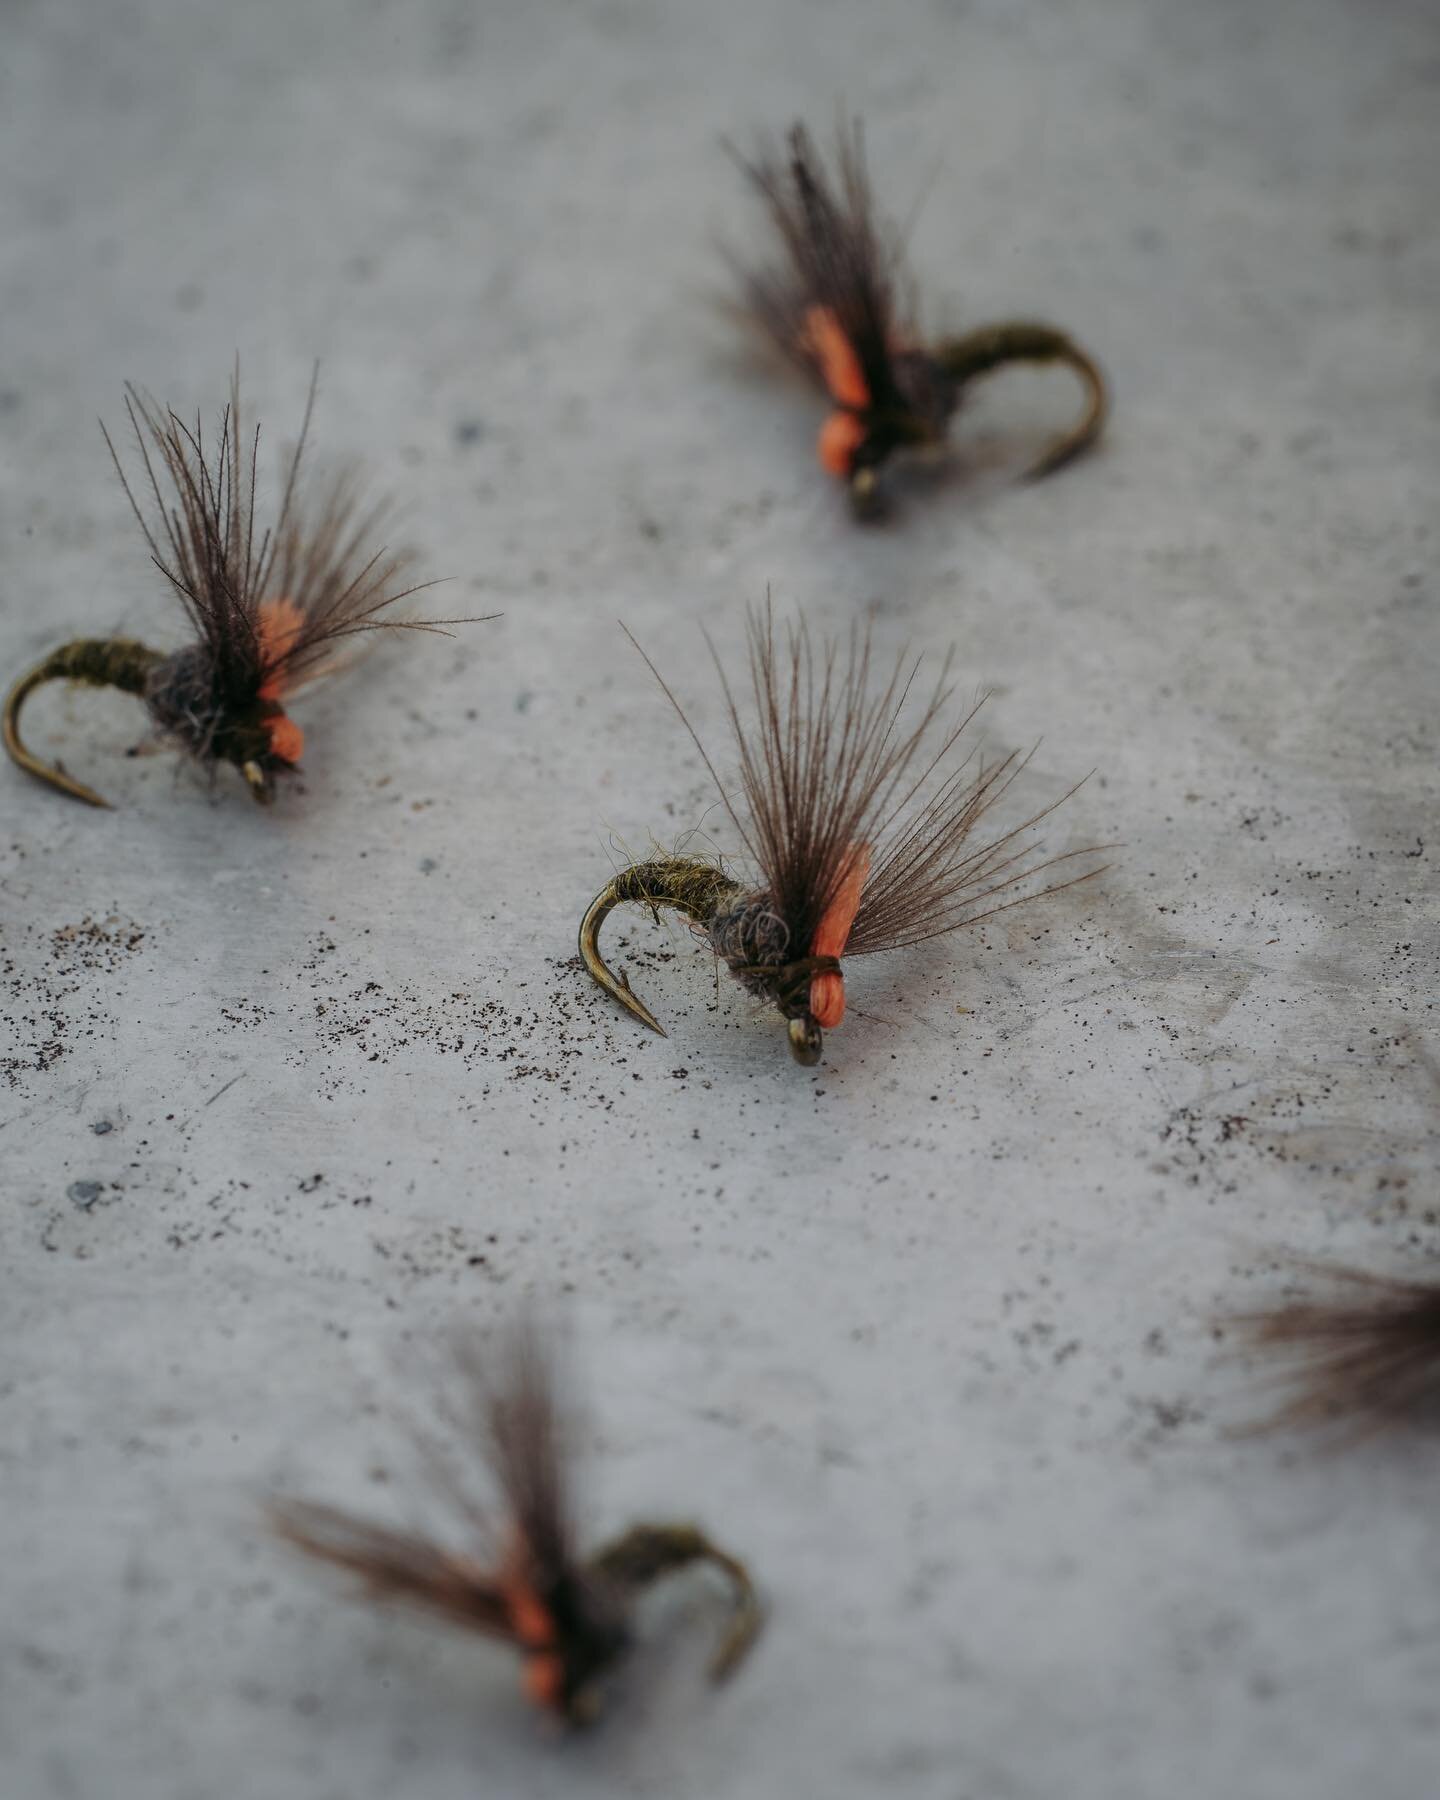 @umpquafeathermerchants Antonio&rsquo;s Emerger BWO is a great bug this time of year. We are starting to see some early Blue Wings coming off and this is a great pattern to imitate the small emerging bugs on the surface.

Stop by and pick some up!
-
